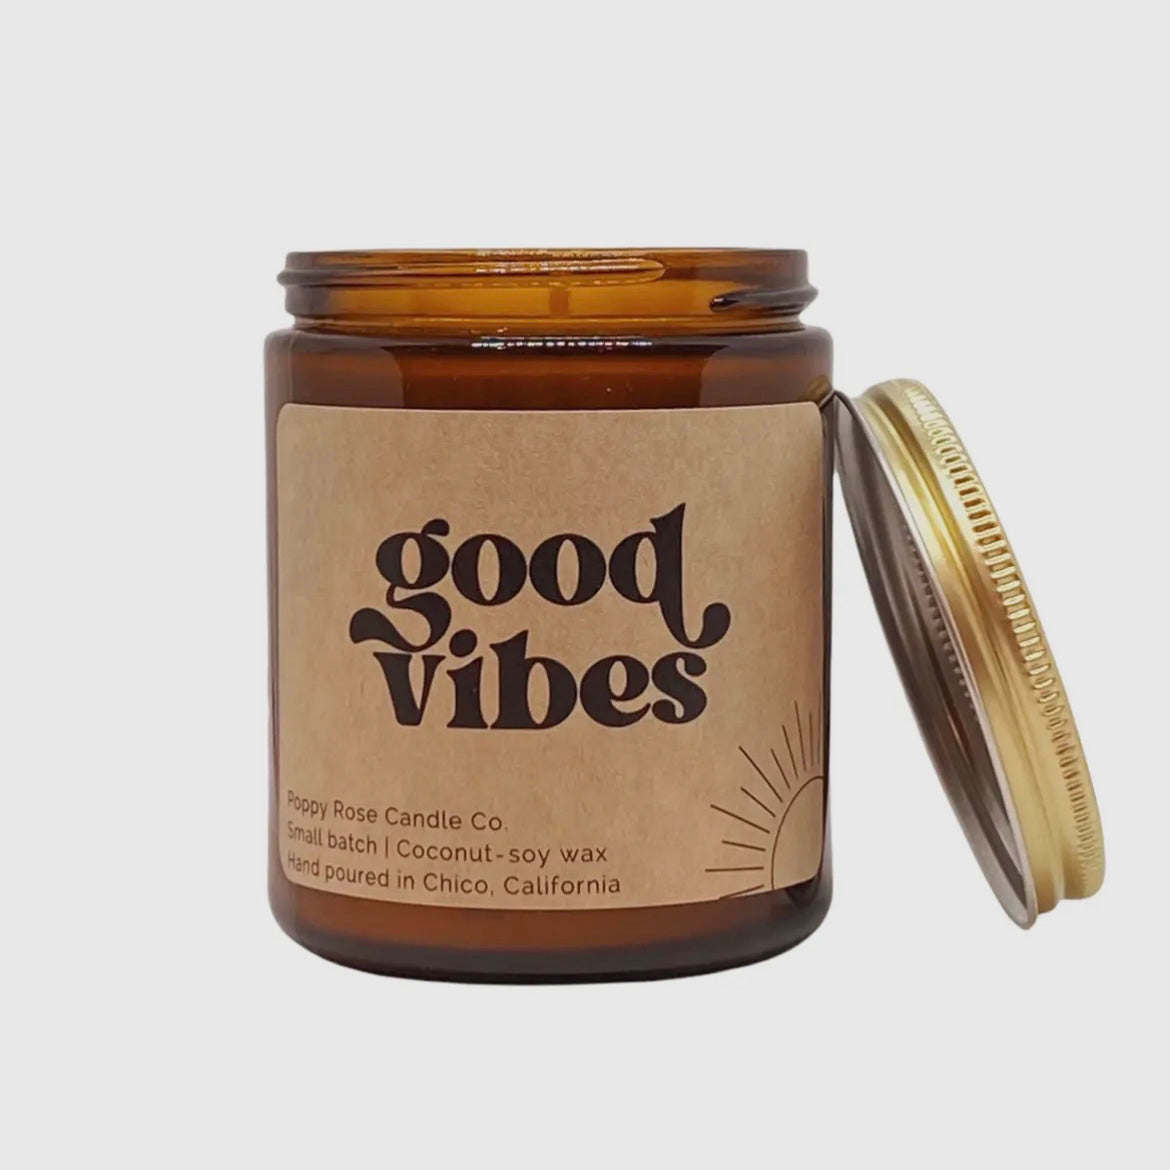 Poppy Rose Candle Co, Good Vibes 8 oz Coconut Wax Amber Jar Candle